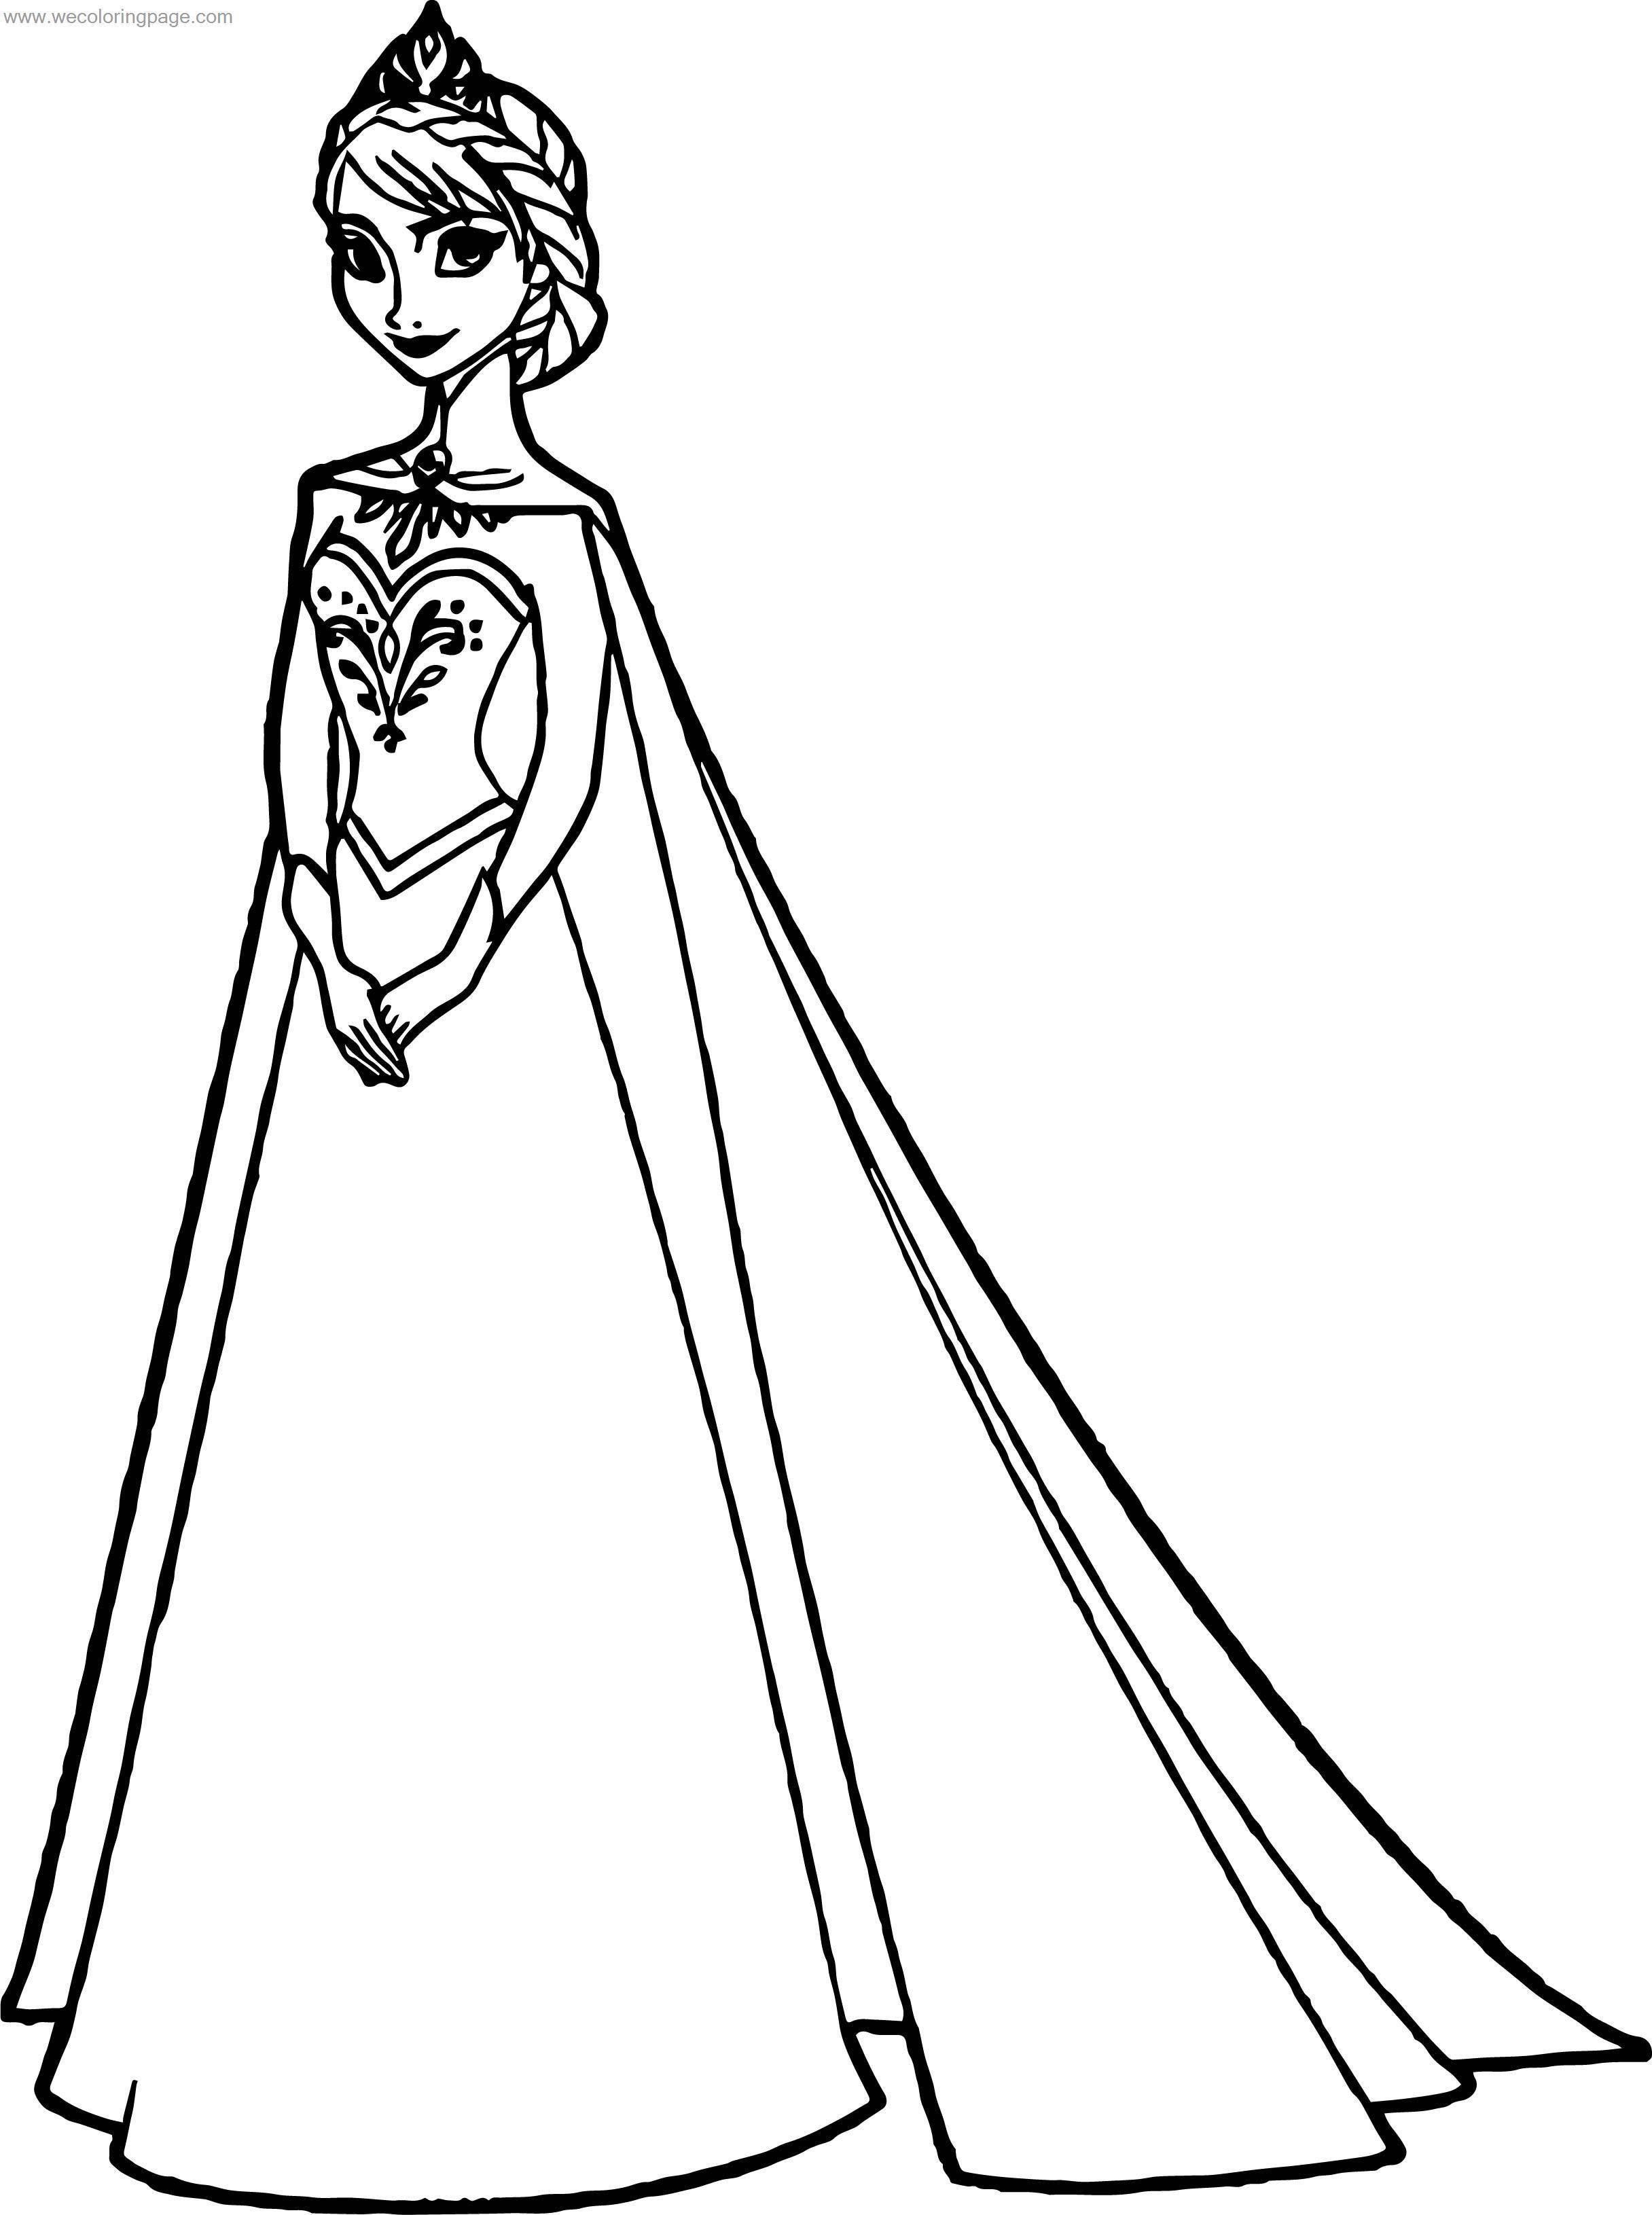 Queen Elsa Drawing | Free download on ClipArtMag